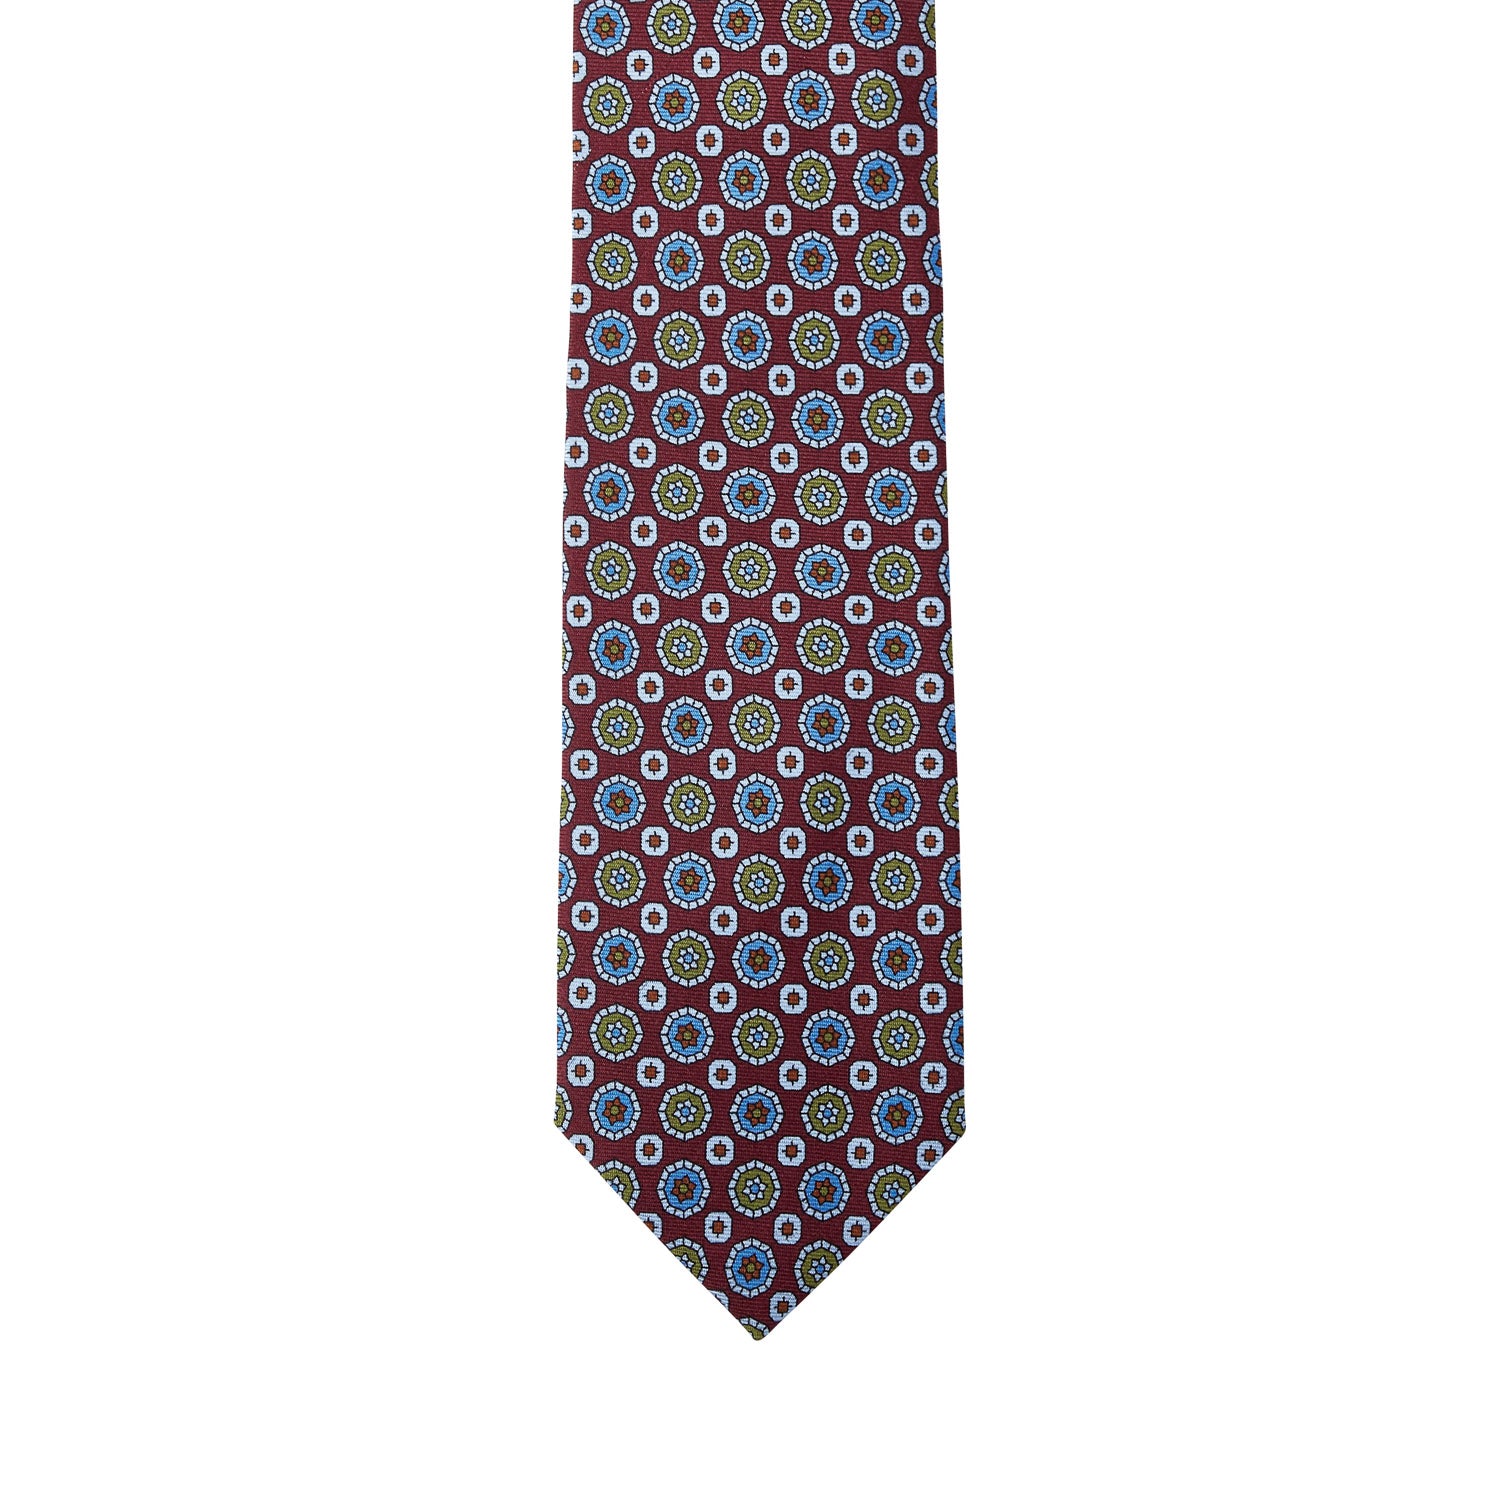 A Sovereign Grade Burgundy 36oz Printed Silk Maccesfield Tie with a red, blue, and green pattern from KirbyAllison.com.